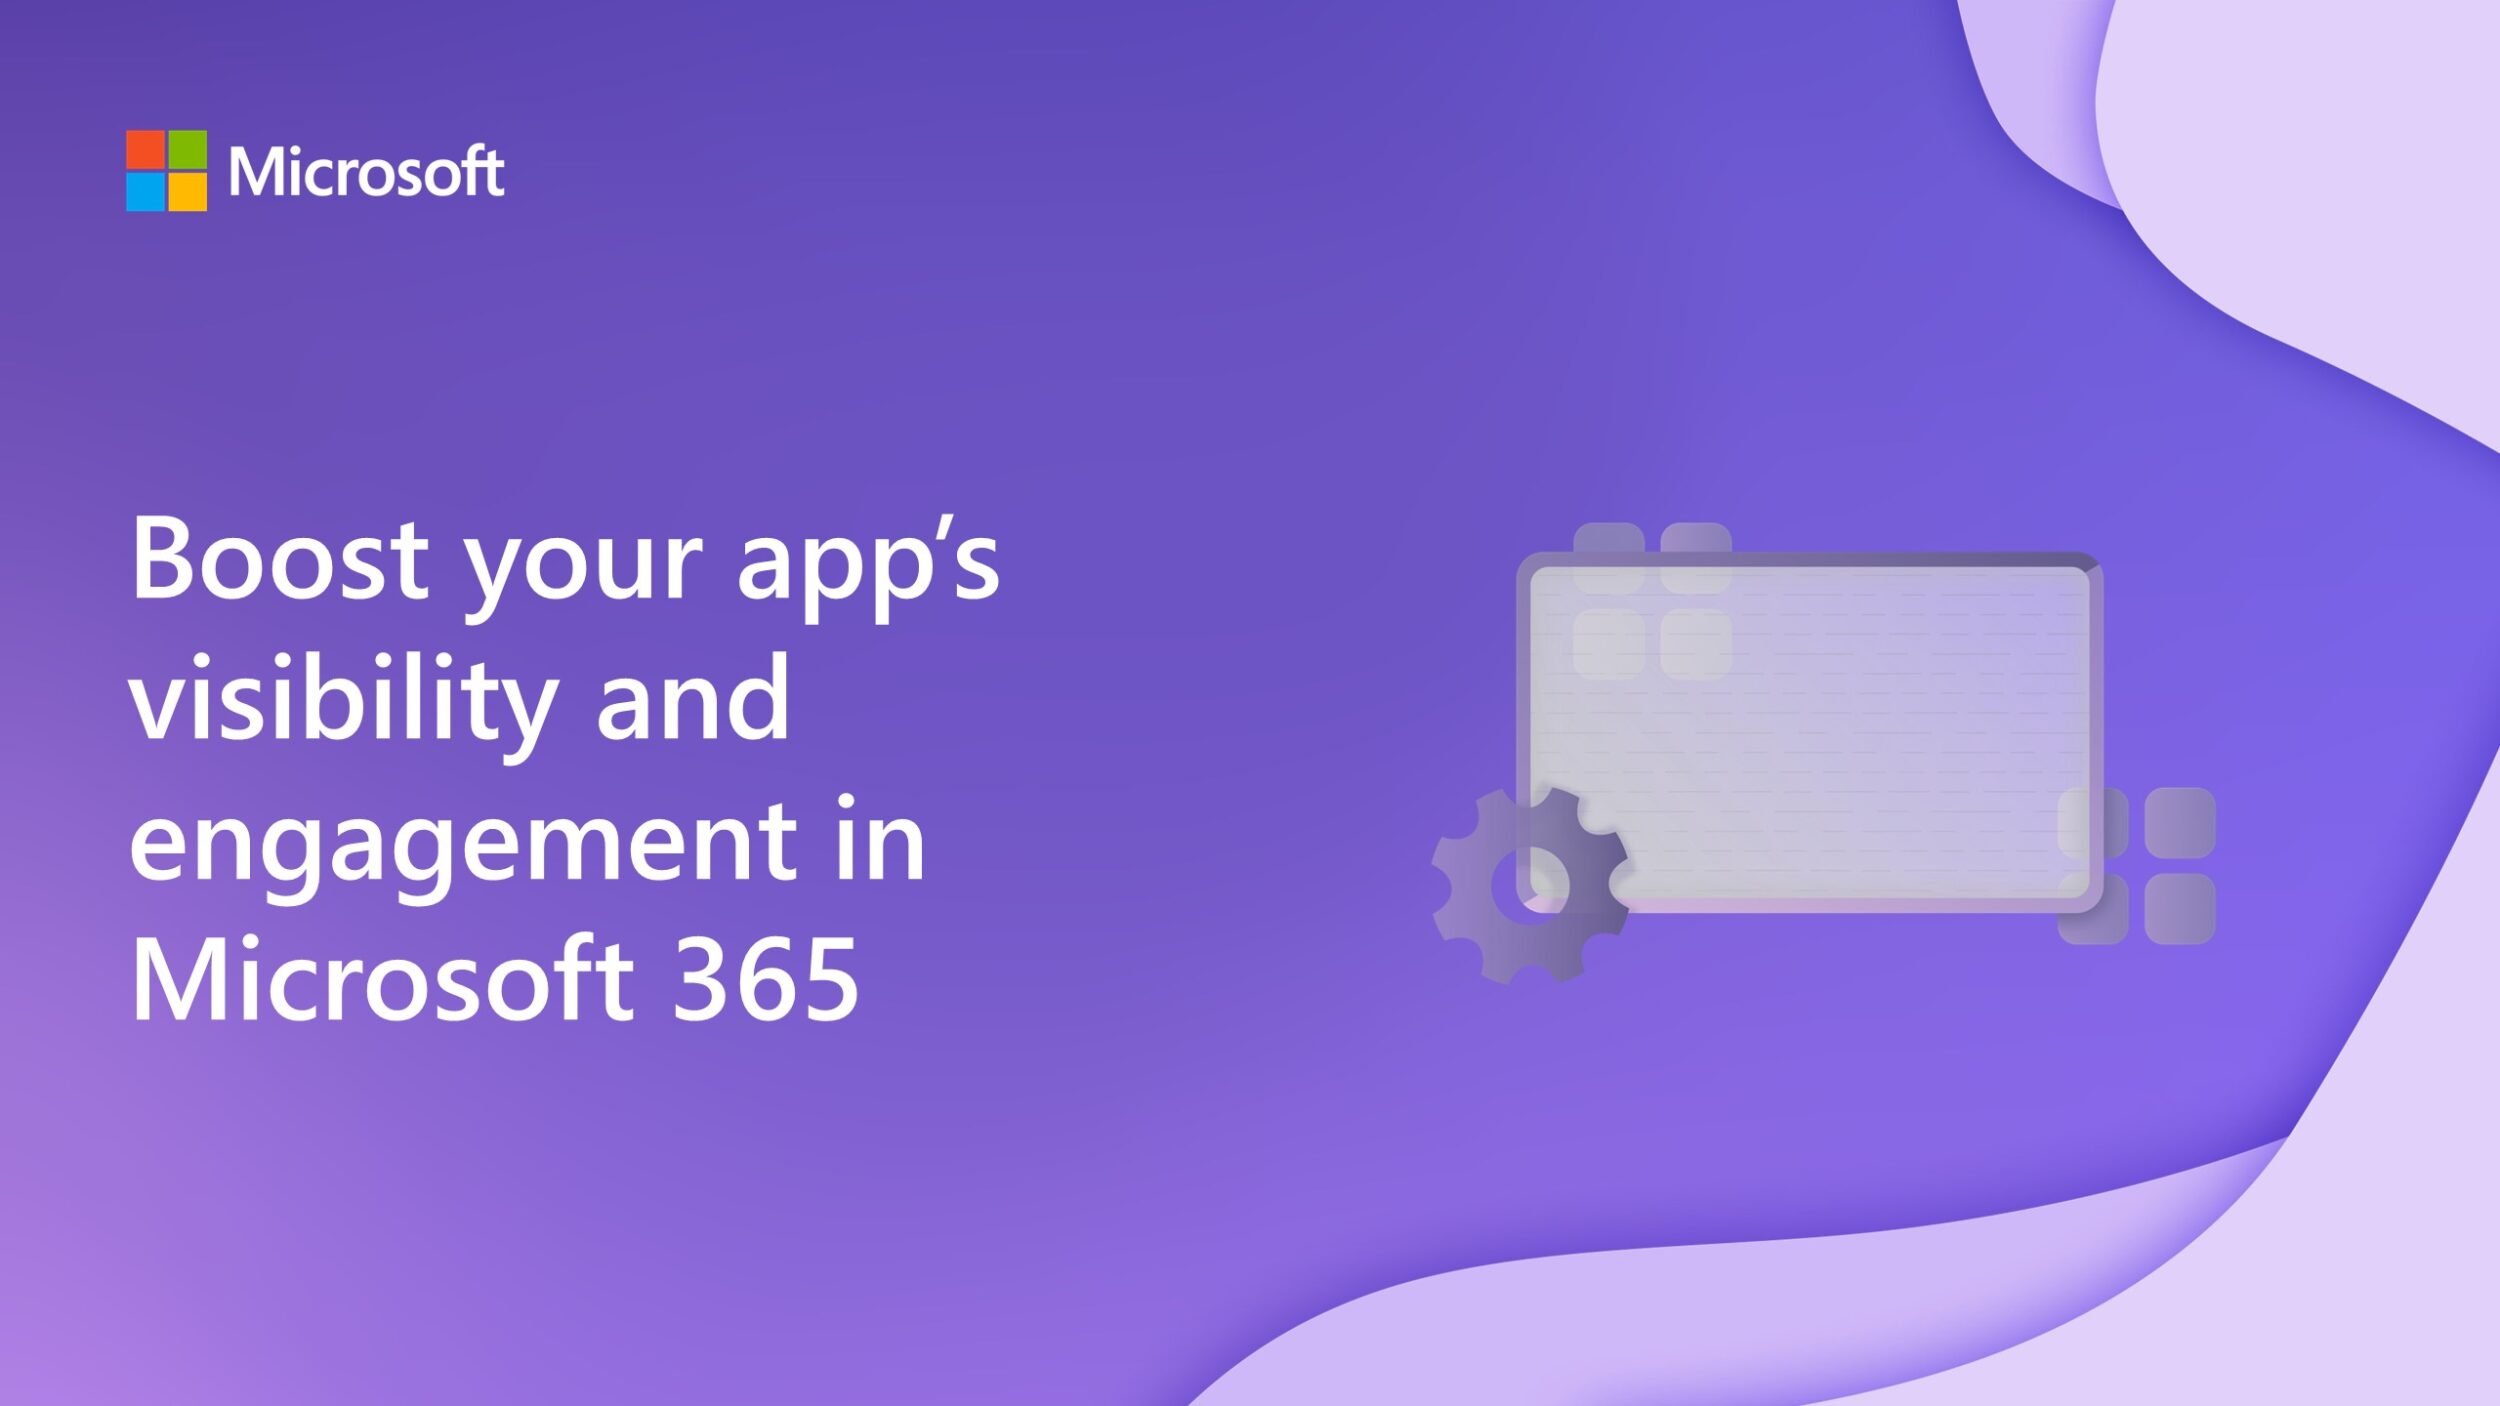 Boost your app’s visibility and engagement in Microsoft 365